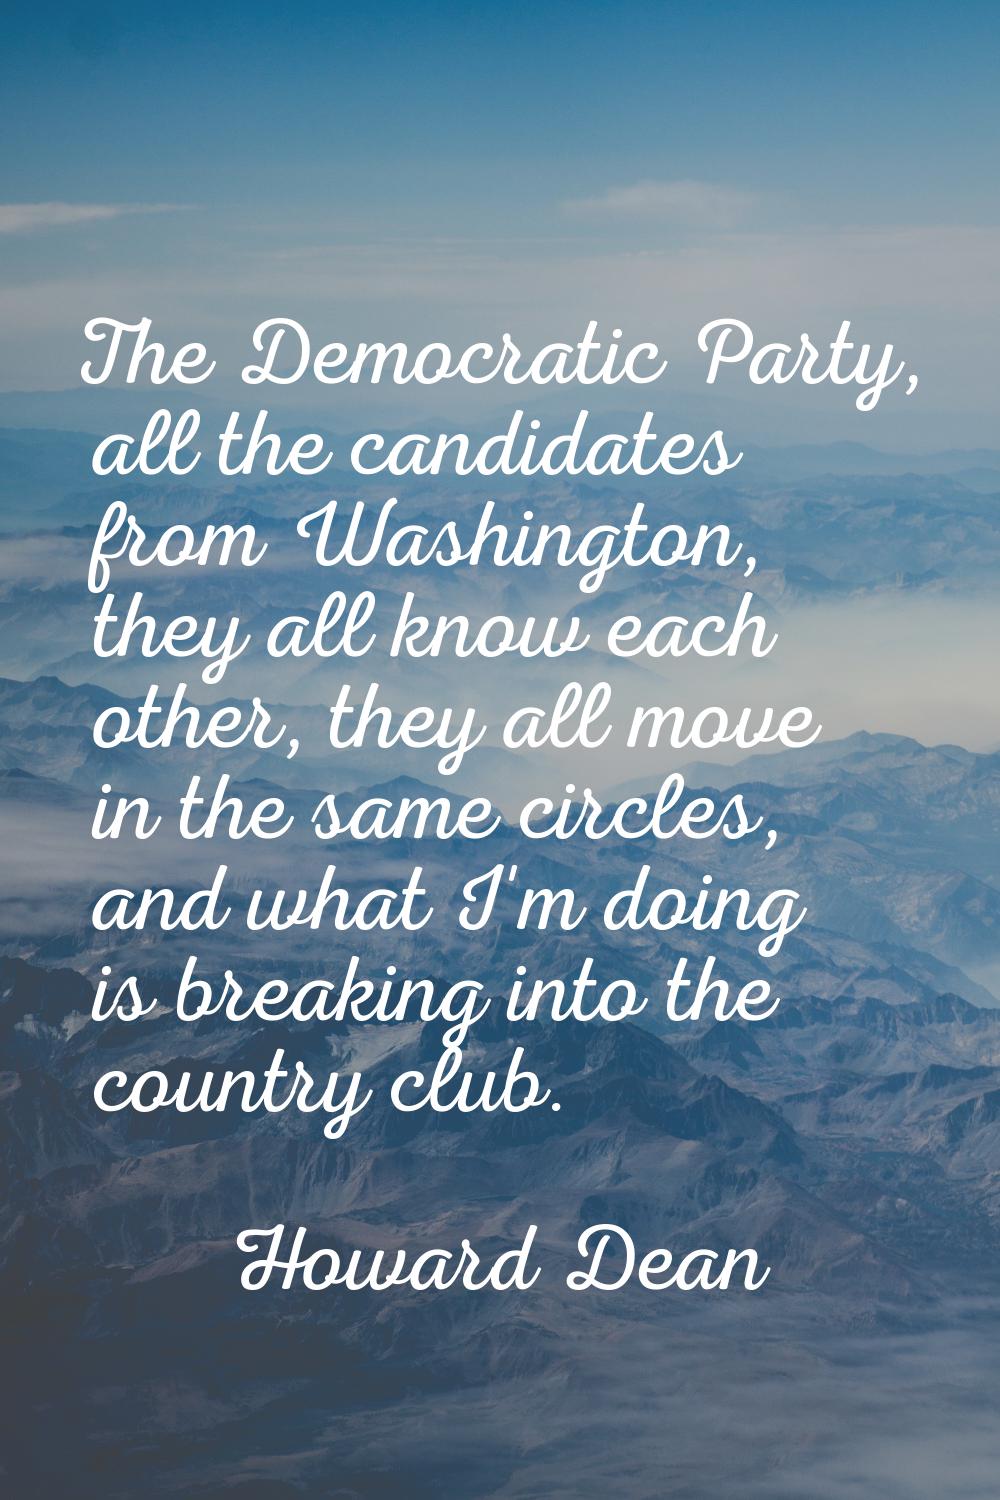 The Democratic Party, all the candidates from Washington, they all know each other, they all move i